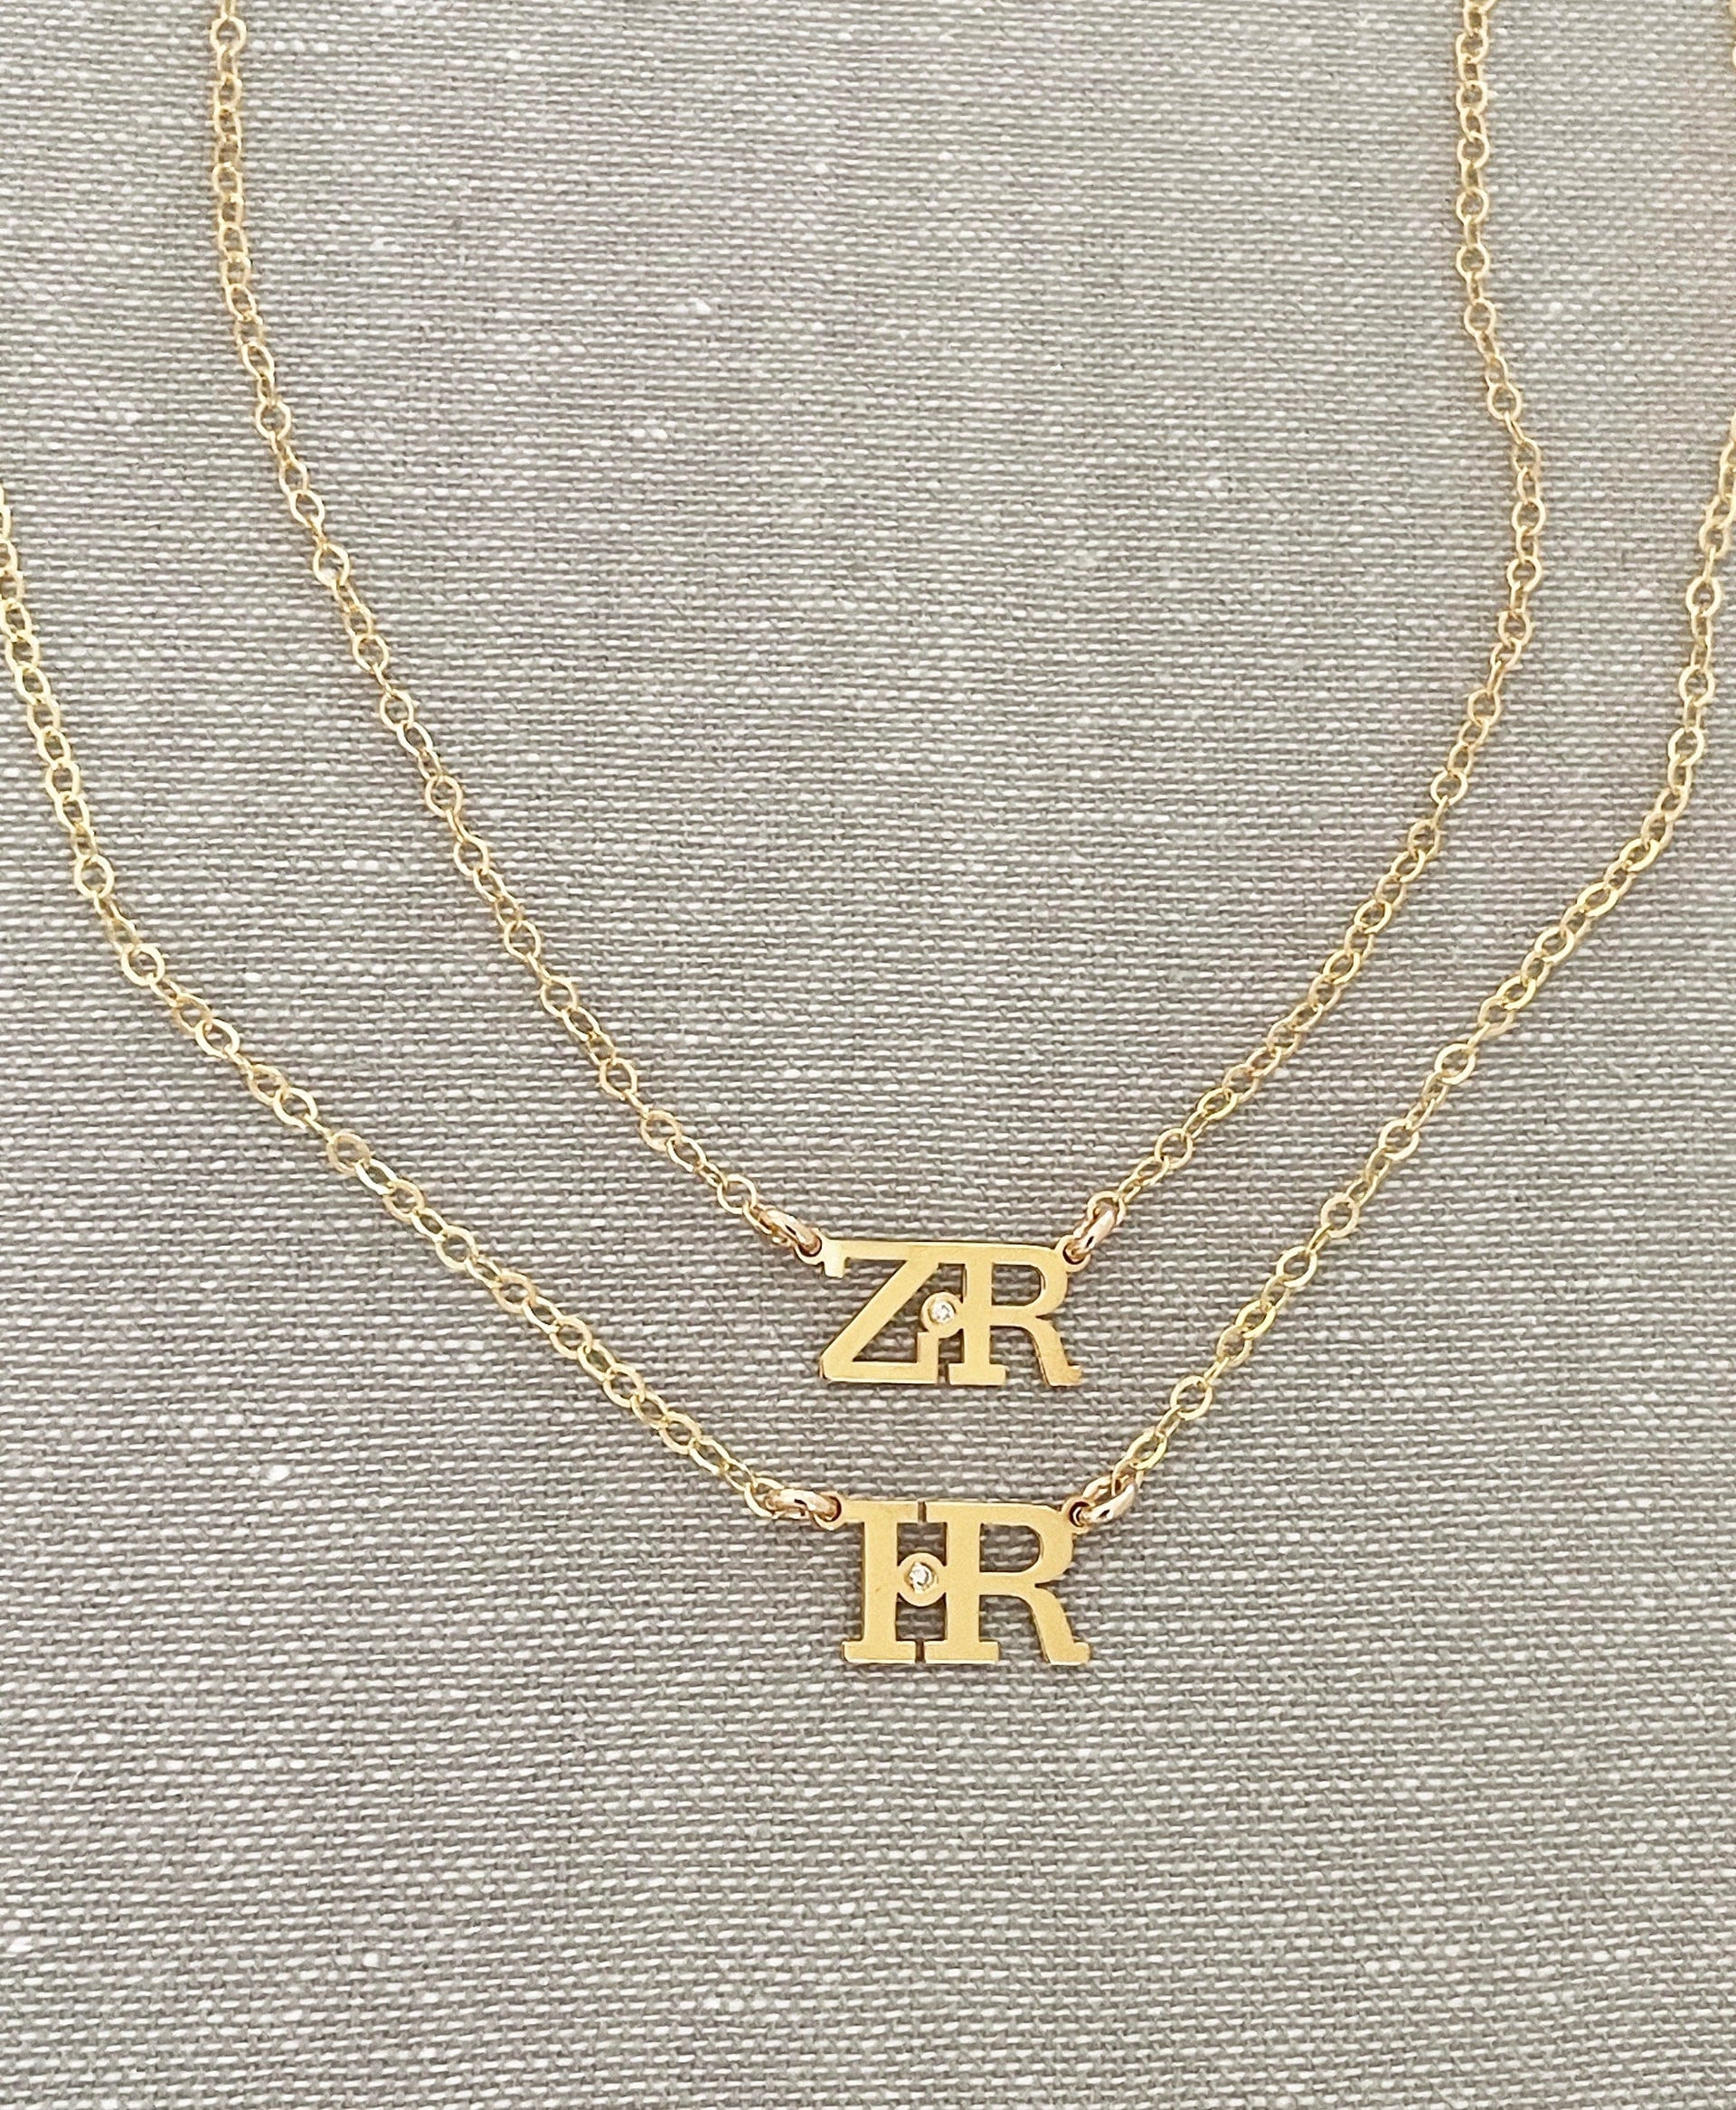 Miriam Merenfeld Jewelry Necklaces Liran Initials Diamond Necklace - Gold Vermeil or Sterling Silver